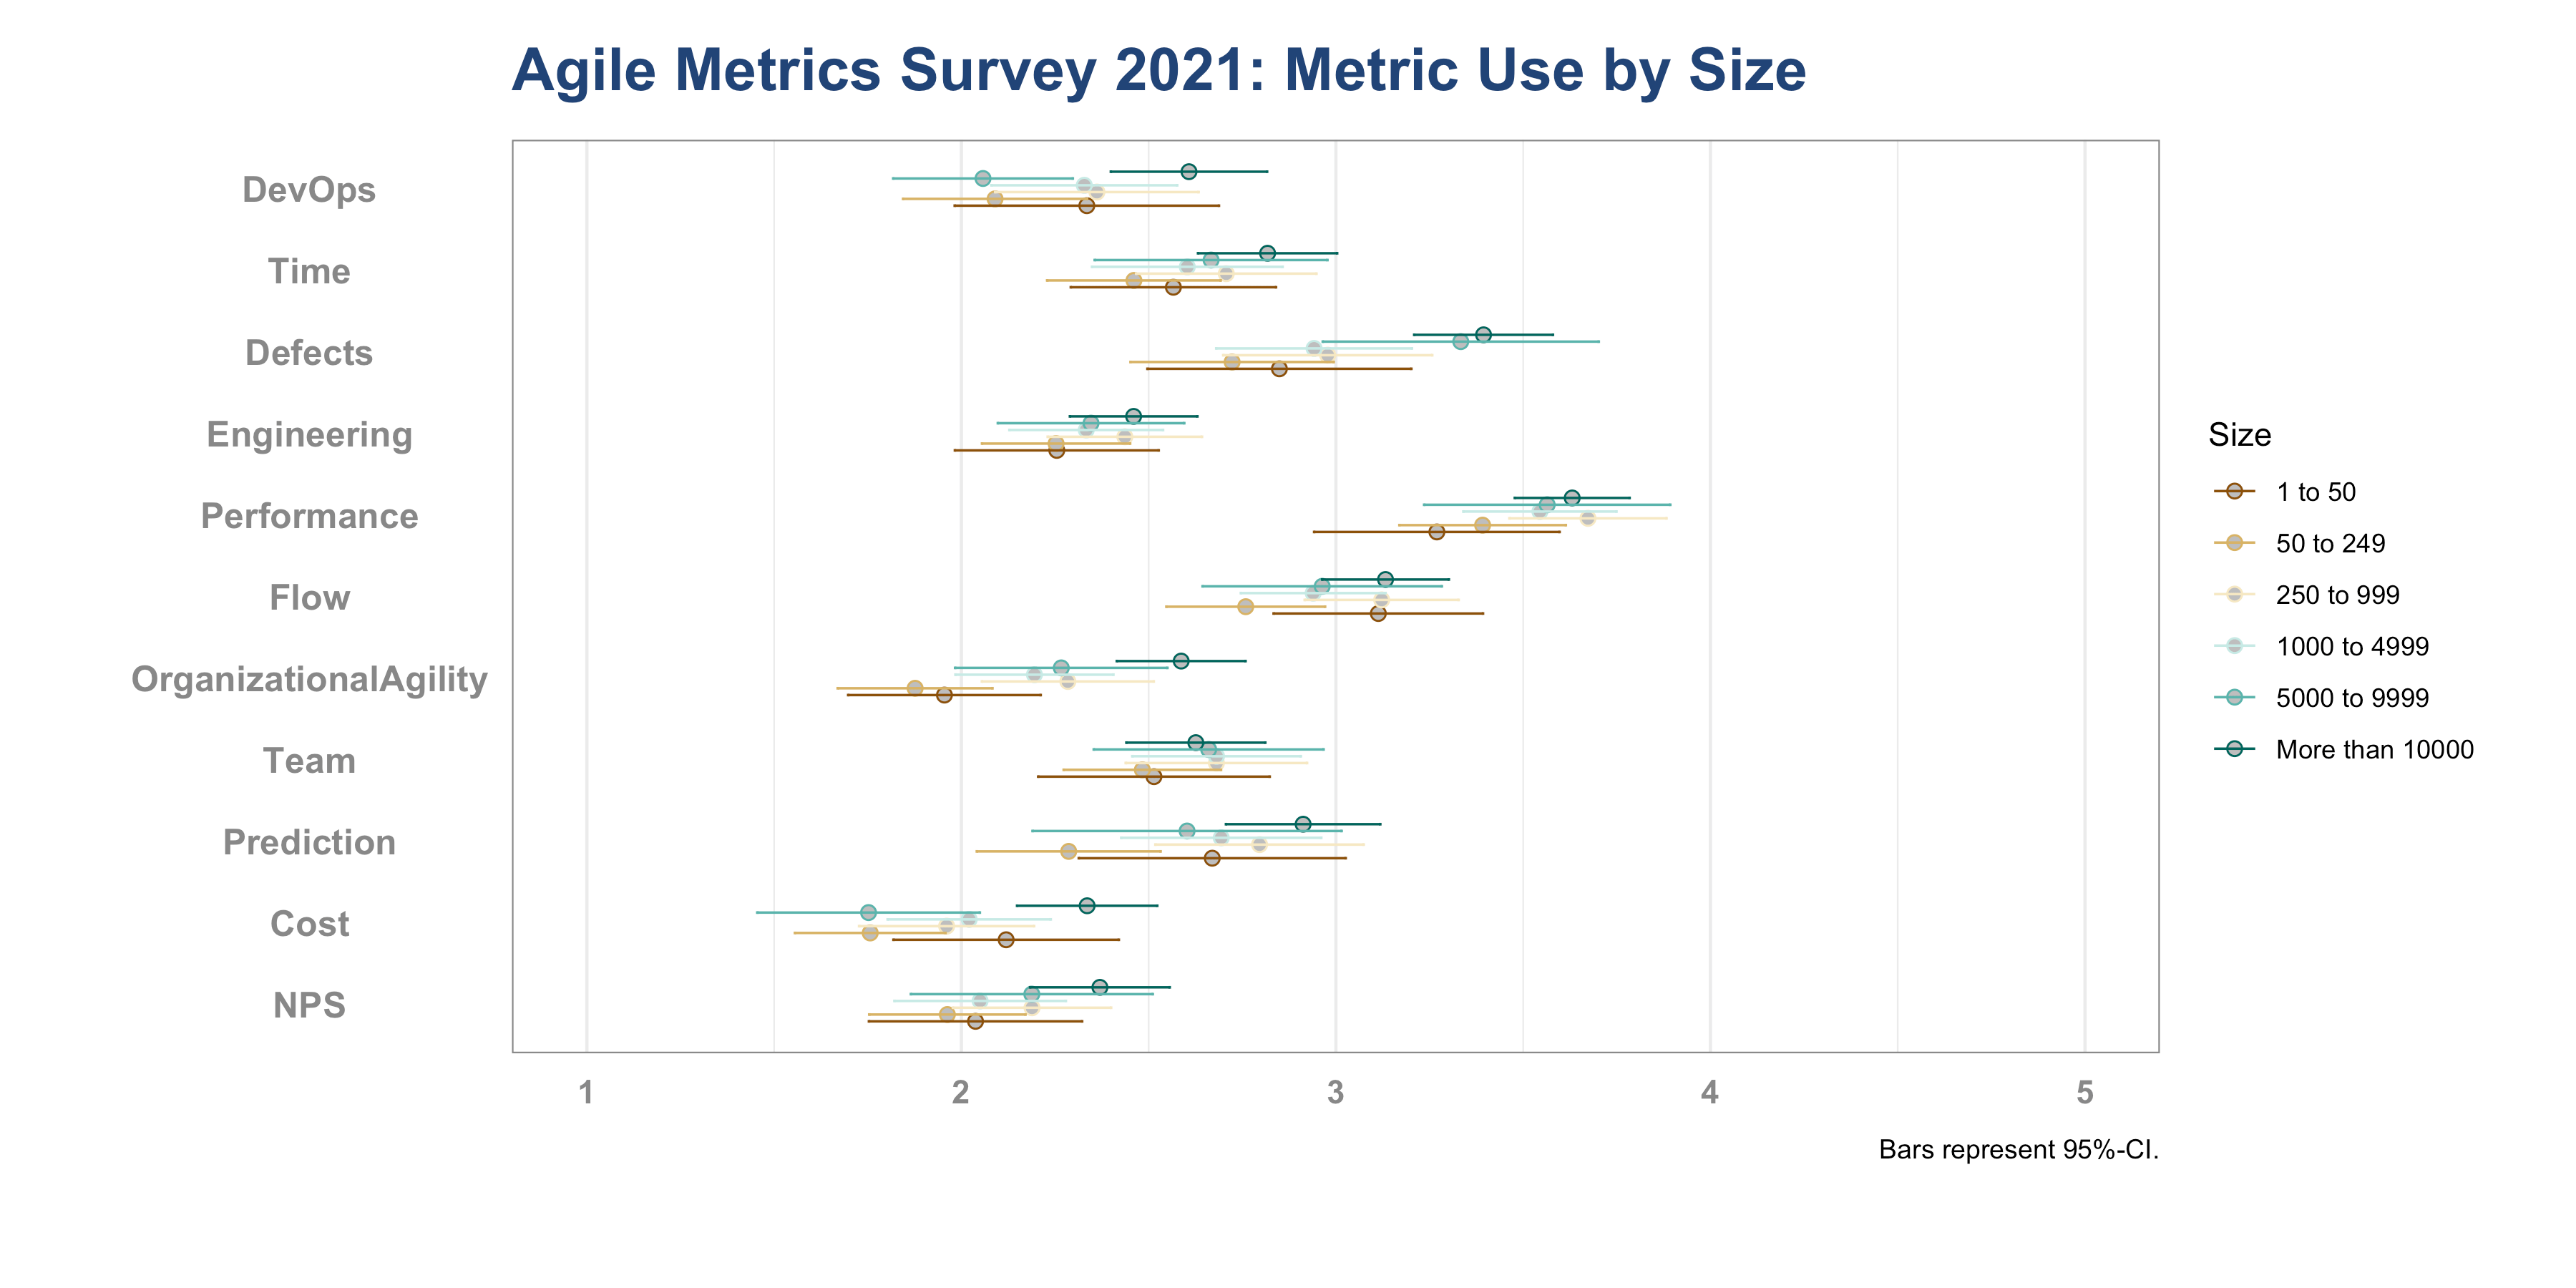 Agile Metrics Survey 2021 by Berlin Product People GmbH: Metric Use by Organizational Size